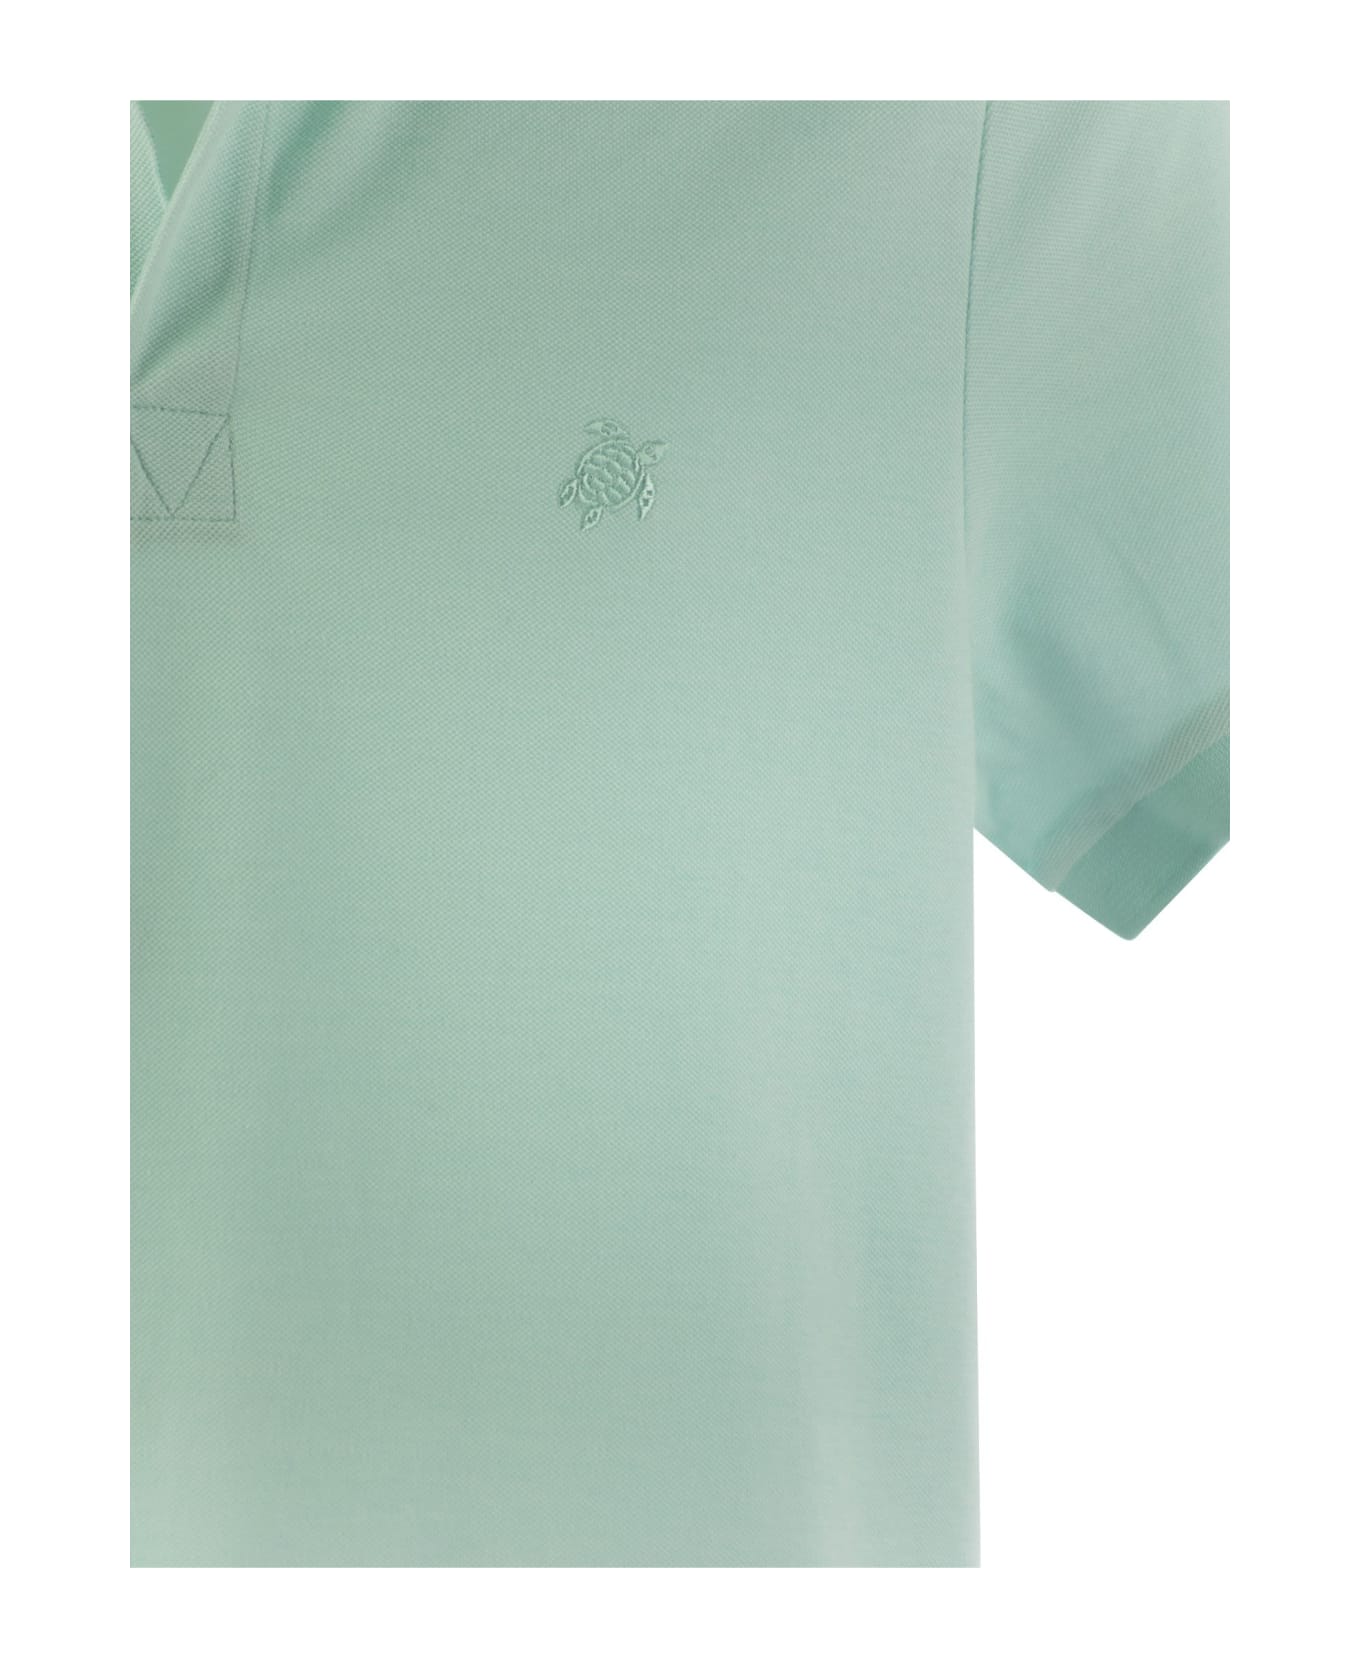 Vilebrequin Short-sleeved Cotton Polo Shirt - Water Green ポロシャツ